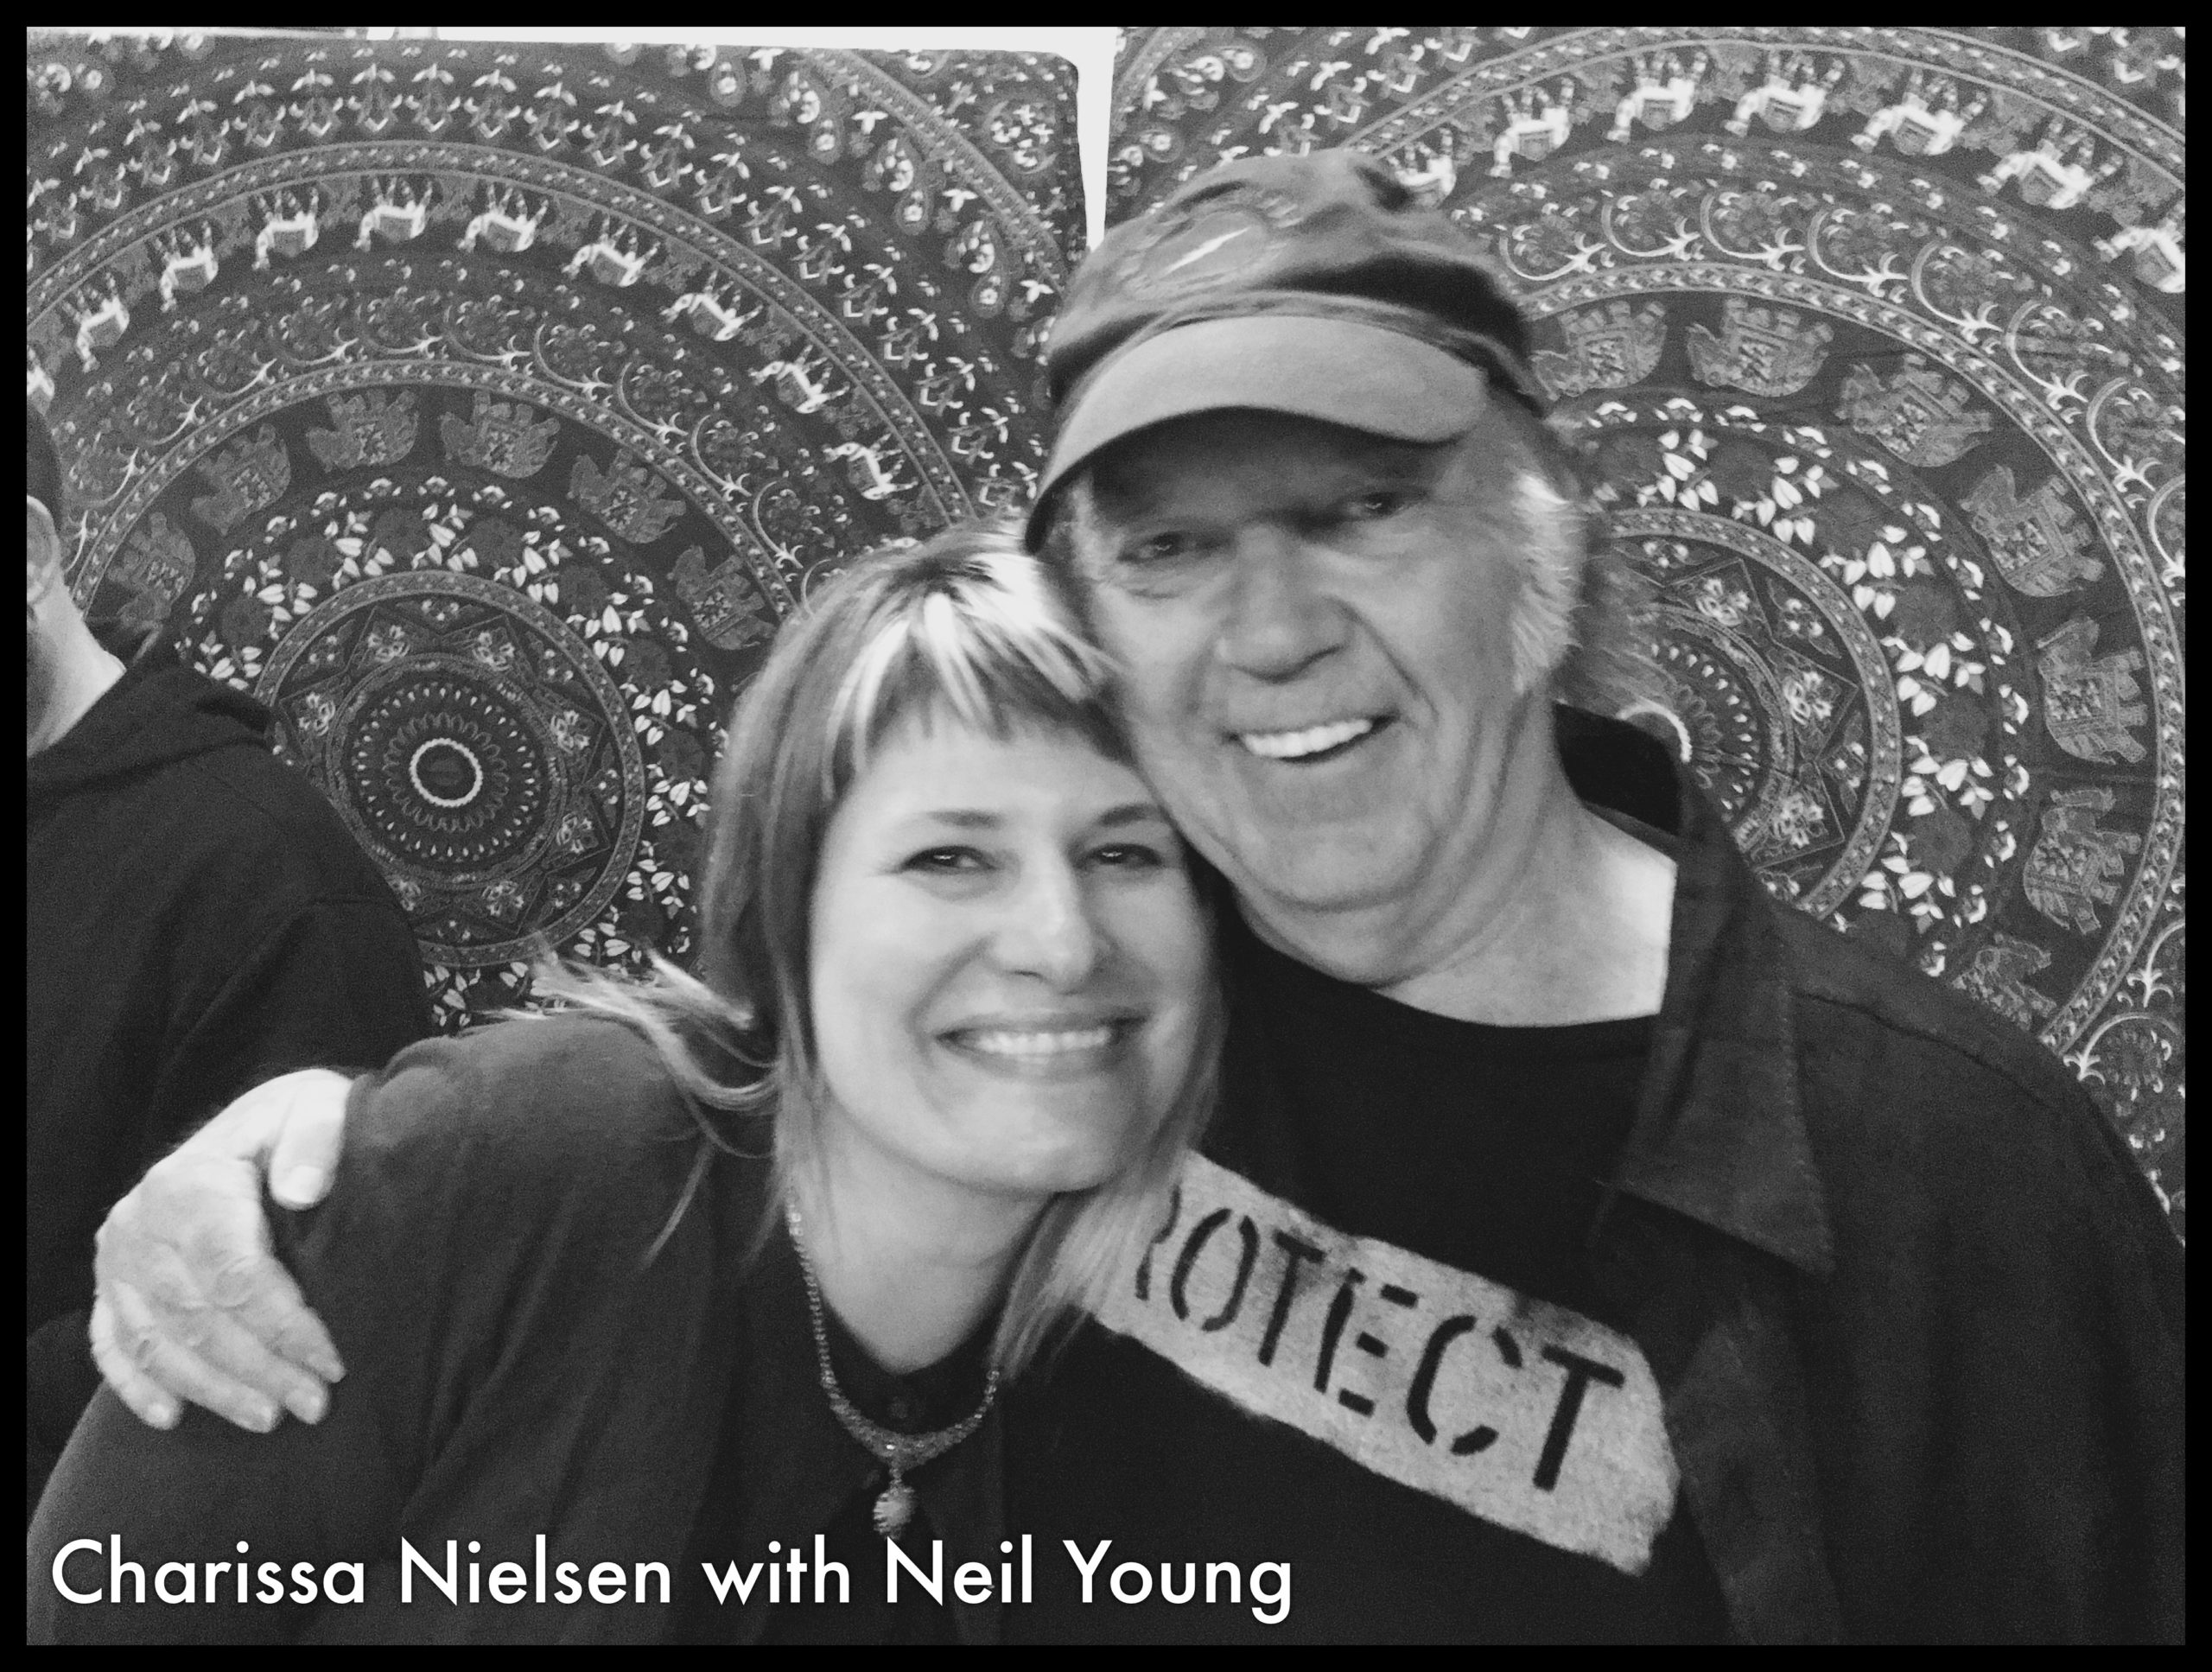 Charissa with Neil Young